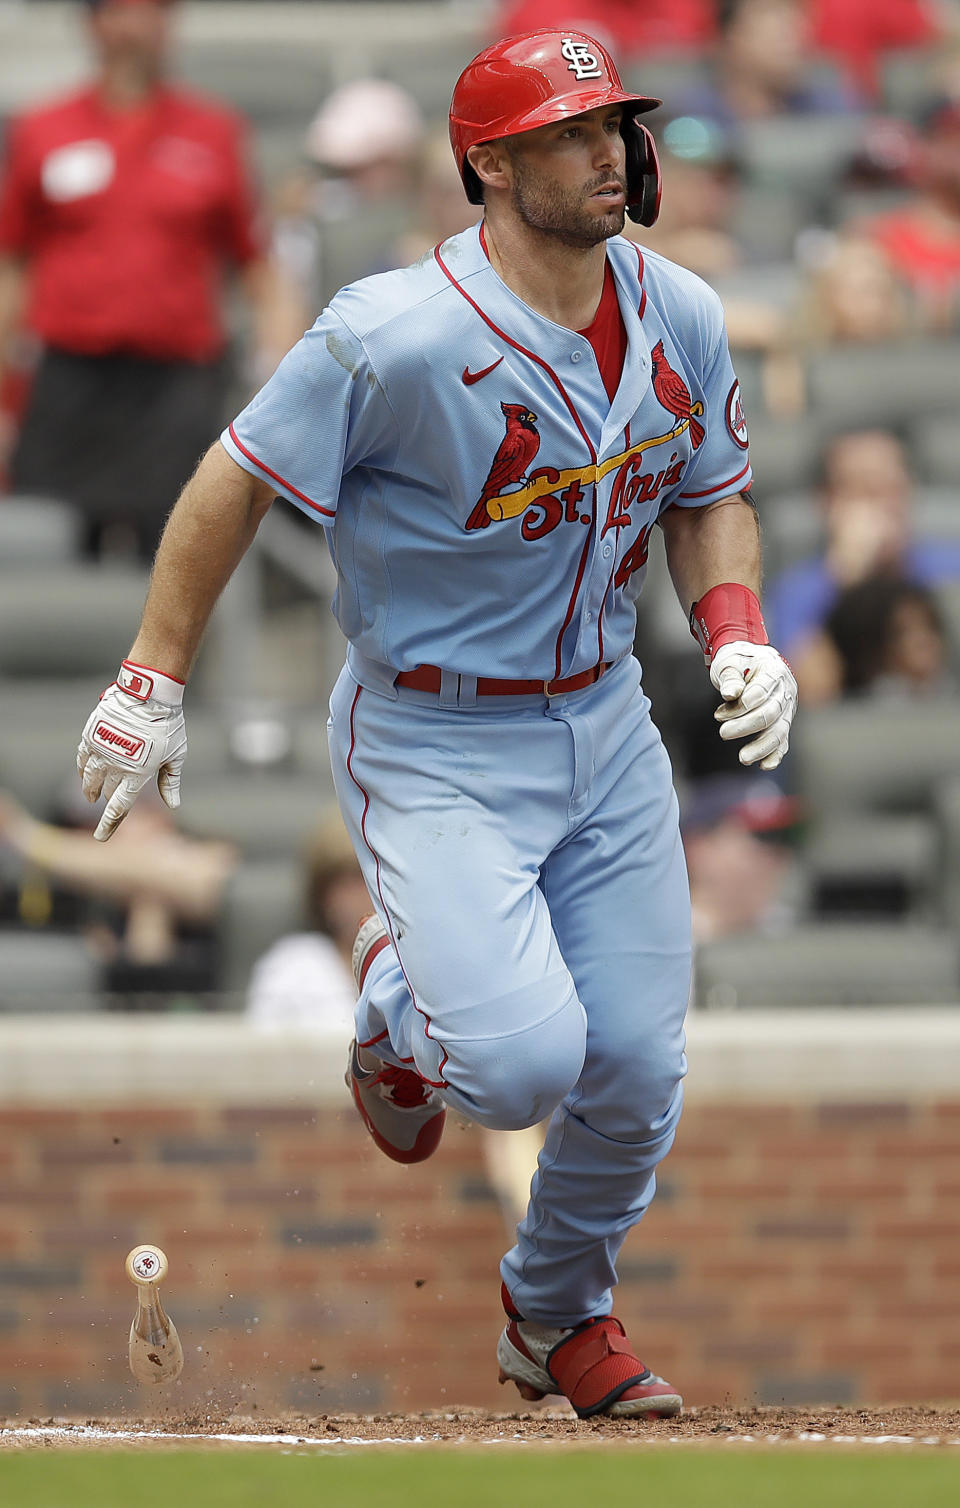 St. Louis Cardinals' Paul Goldschmidt watches his three-run home run hit off Atlanta Braves' Josh Tomlin during the fifth inning of the first baseball game of a doubleheader on Sunday, June 20, 2021, in Atlanta. (AP Photo/Ben Margot)